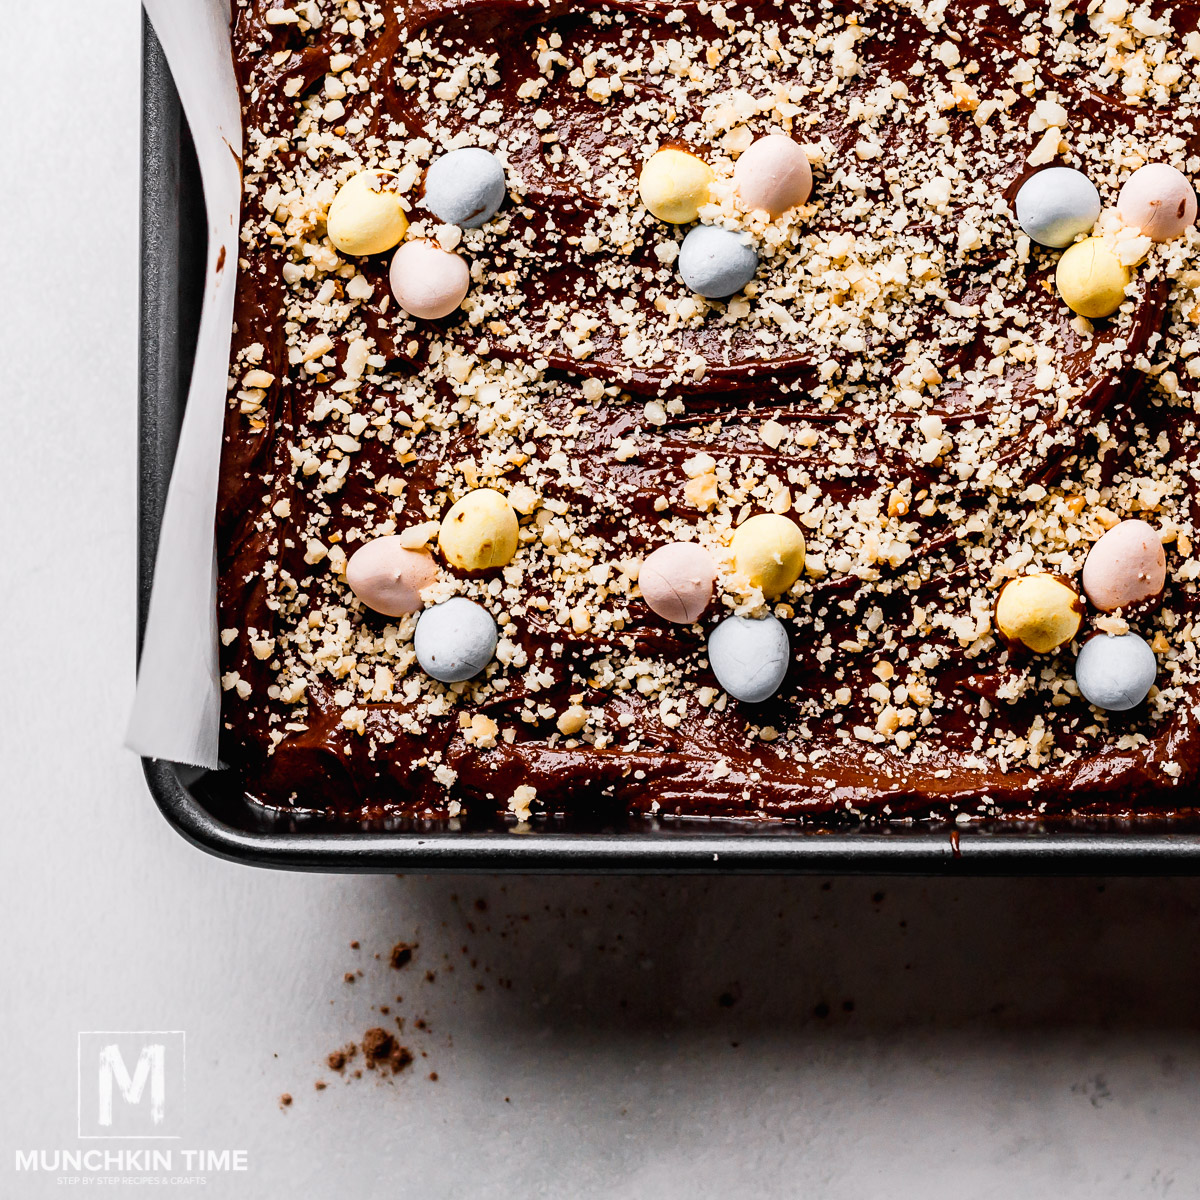  Chocolate Brownie Recipe with Easter eggs chocolate candy.